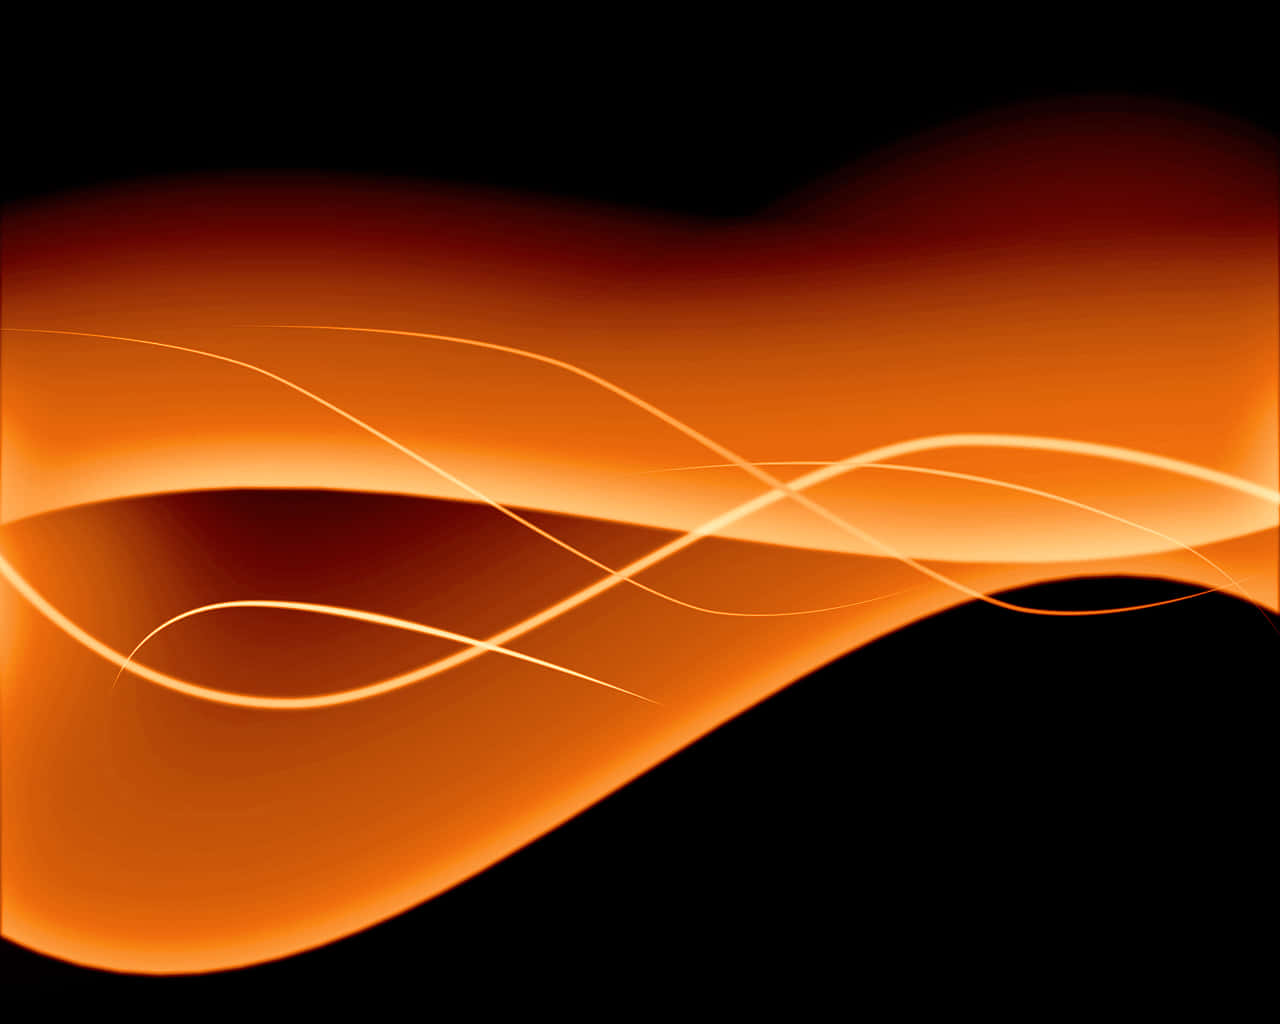 Brighten up your desktop with this bubbly orange background Wallpaper